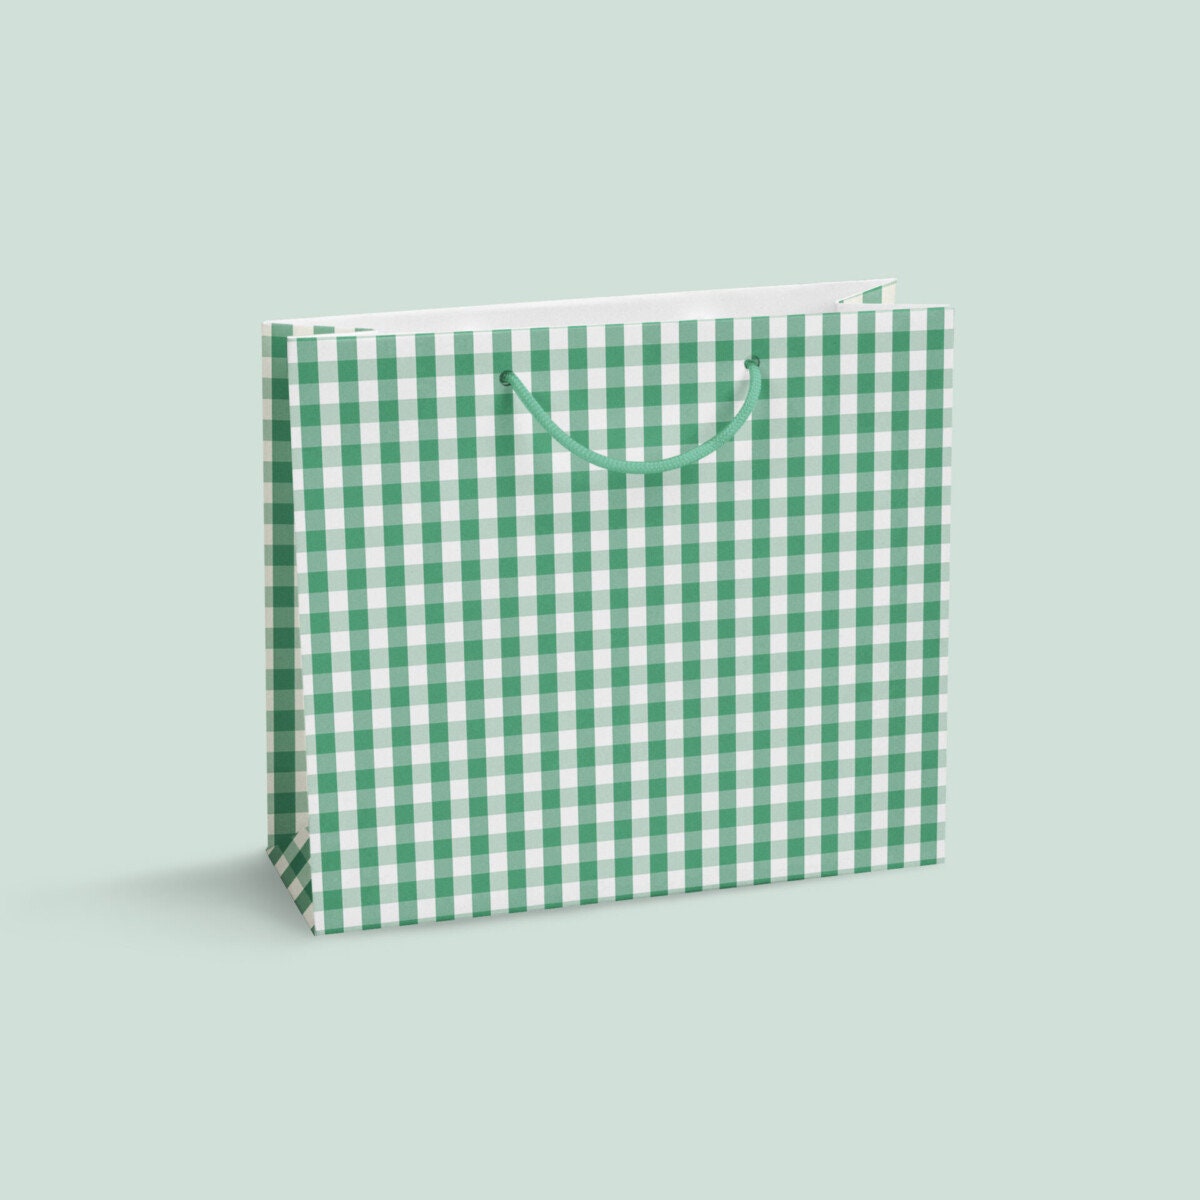 Gingham and Dots and Stitch VIII,